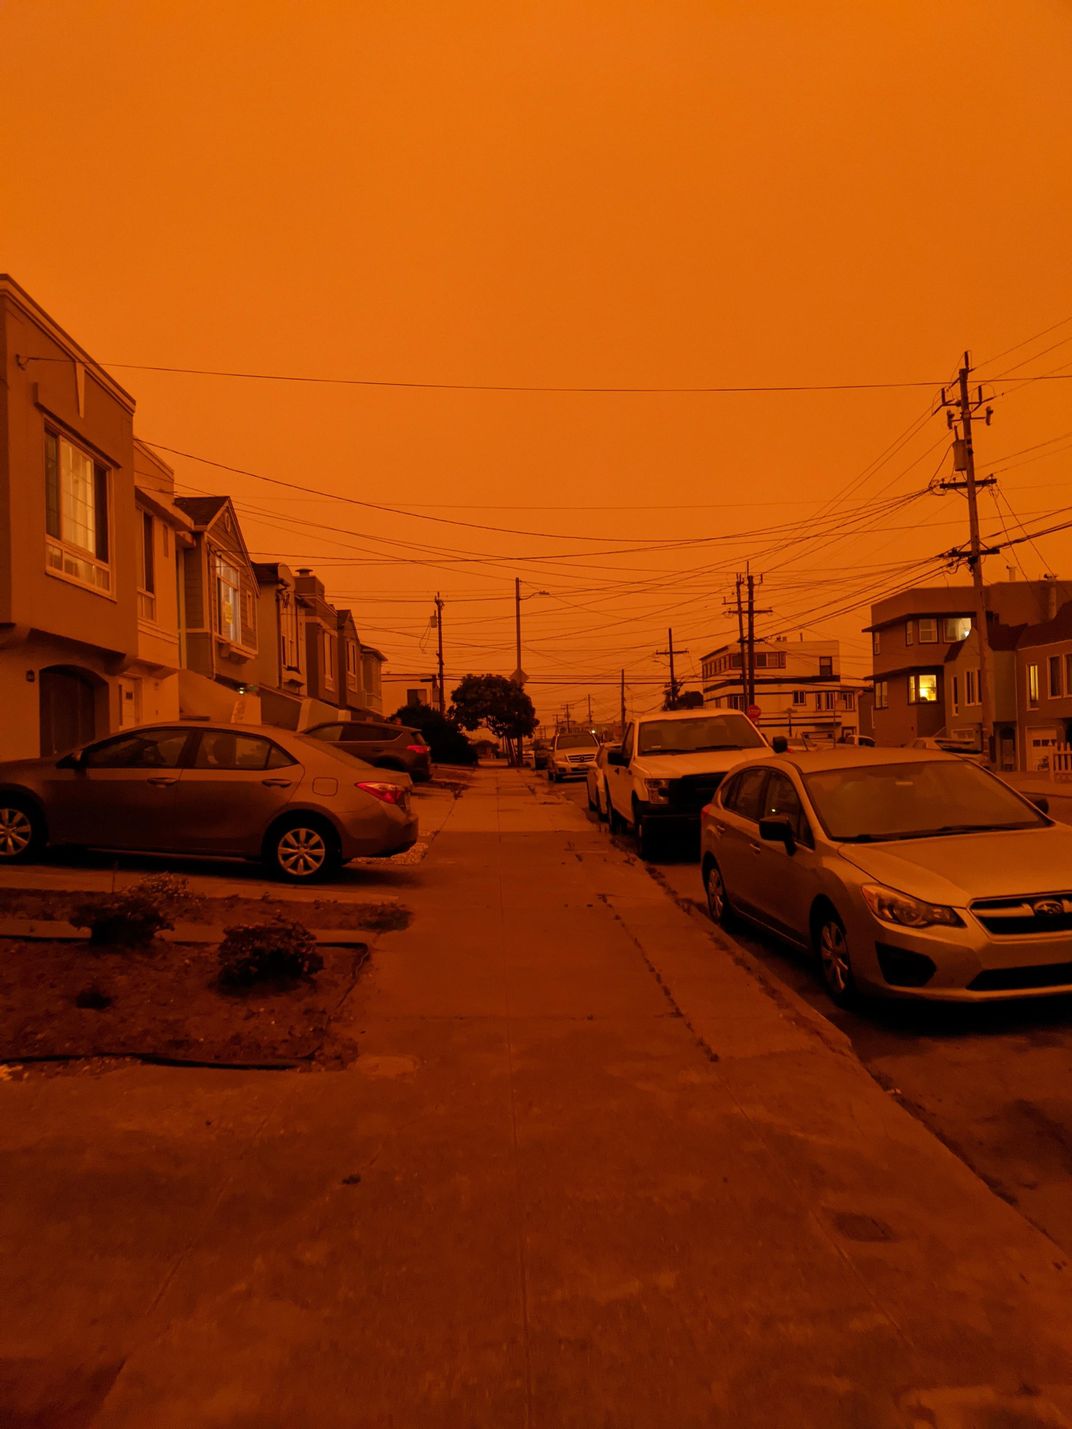 Orange skies in San Francisco's Outer Sunset District